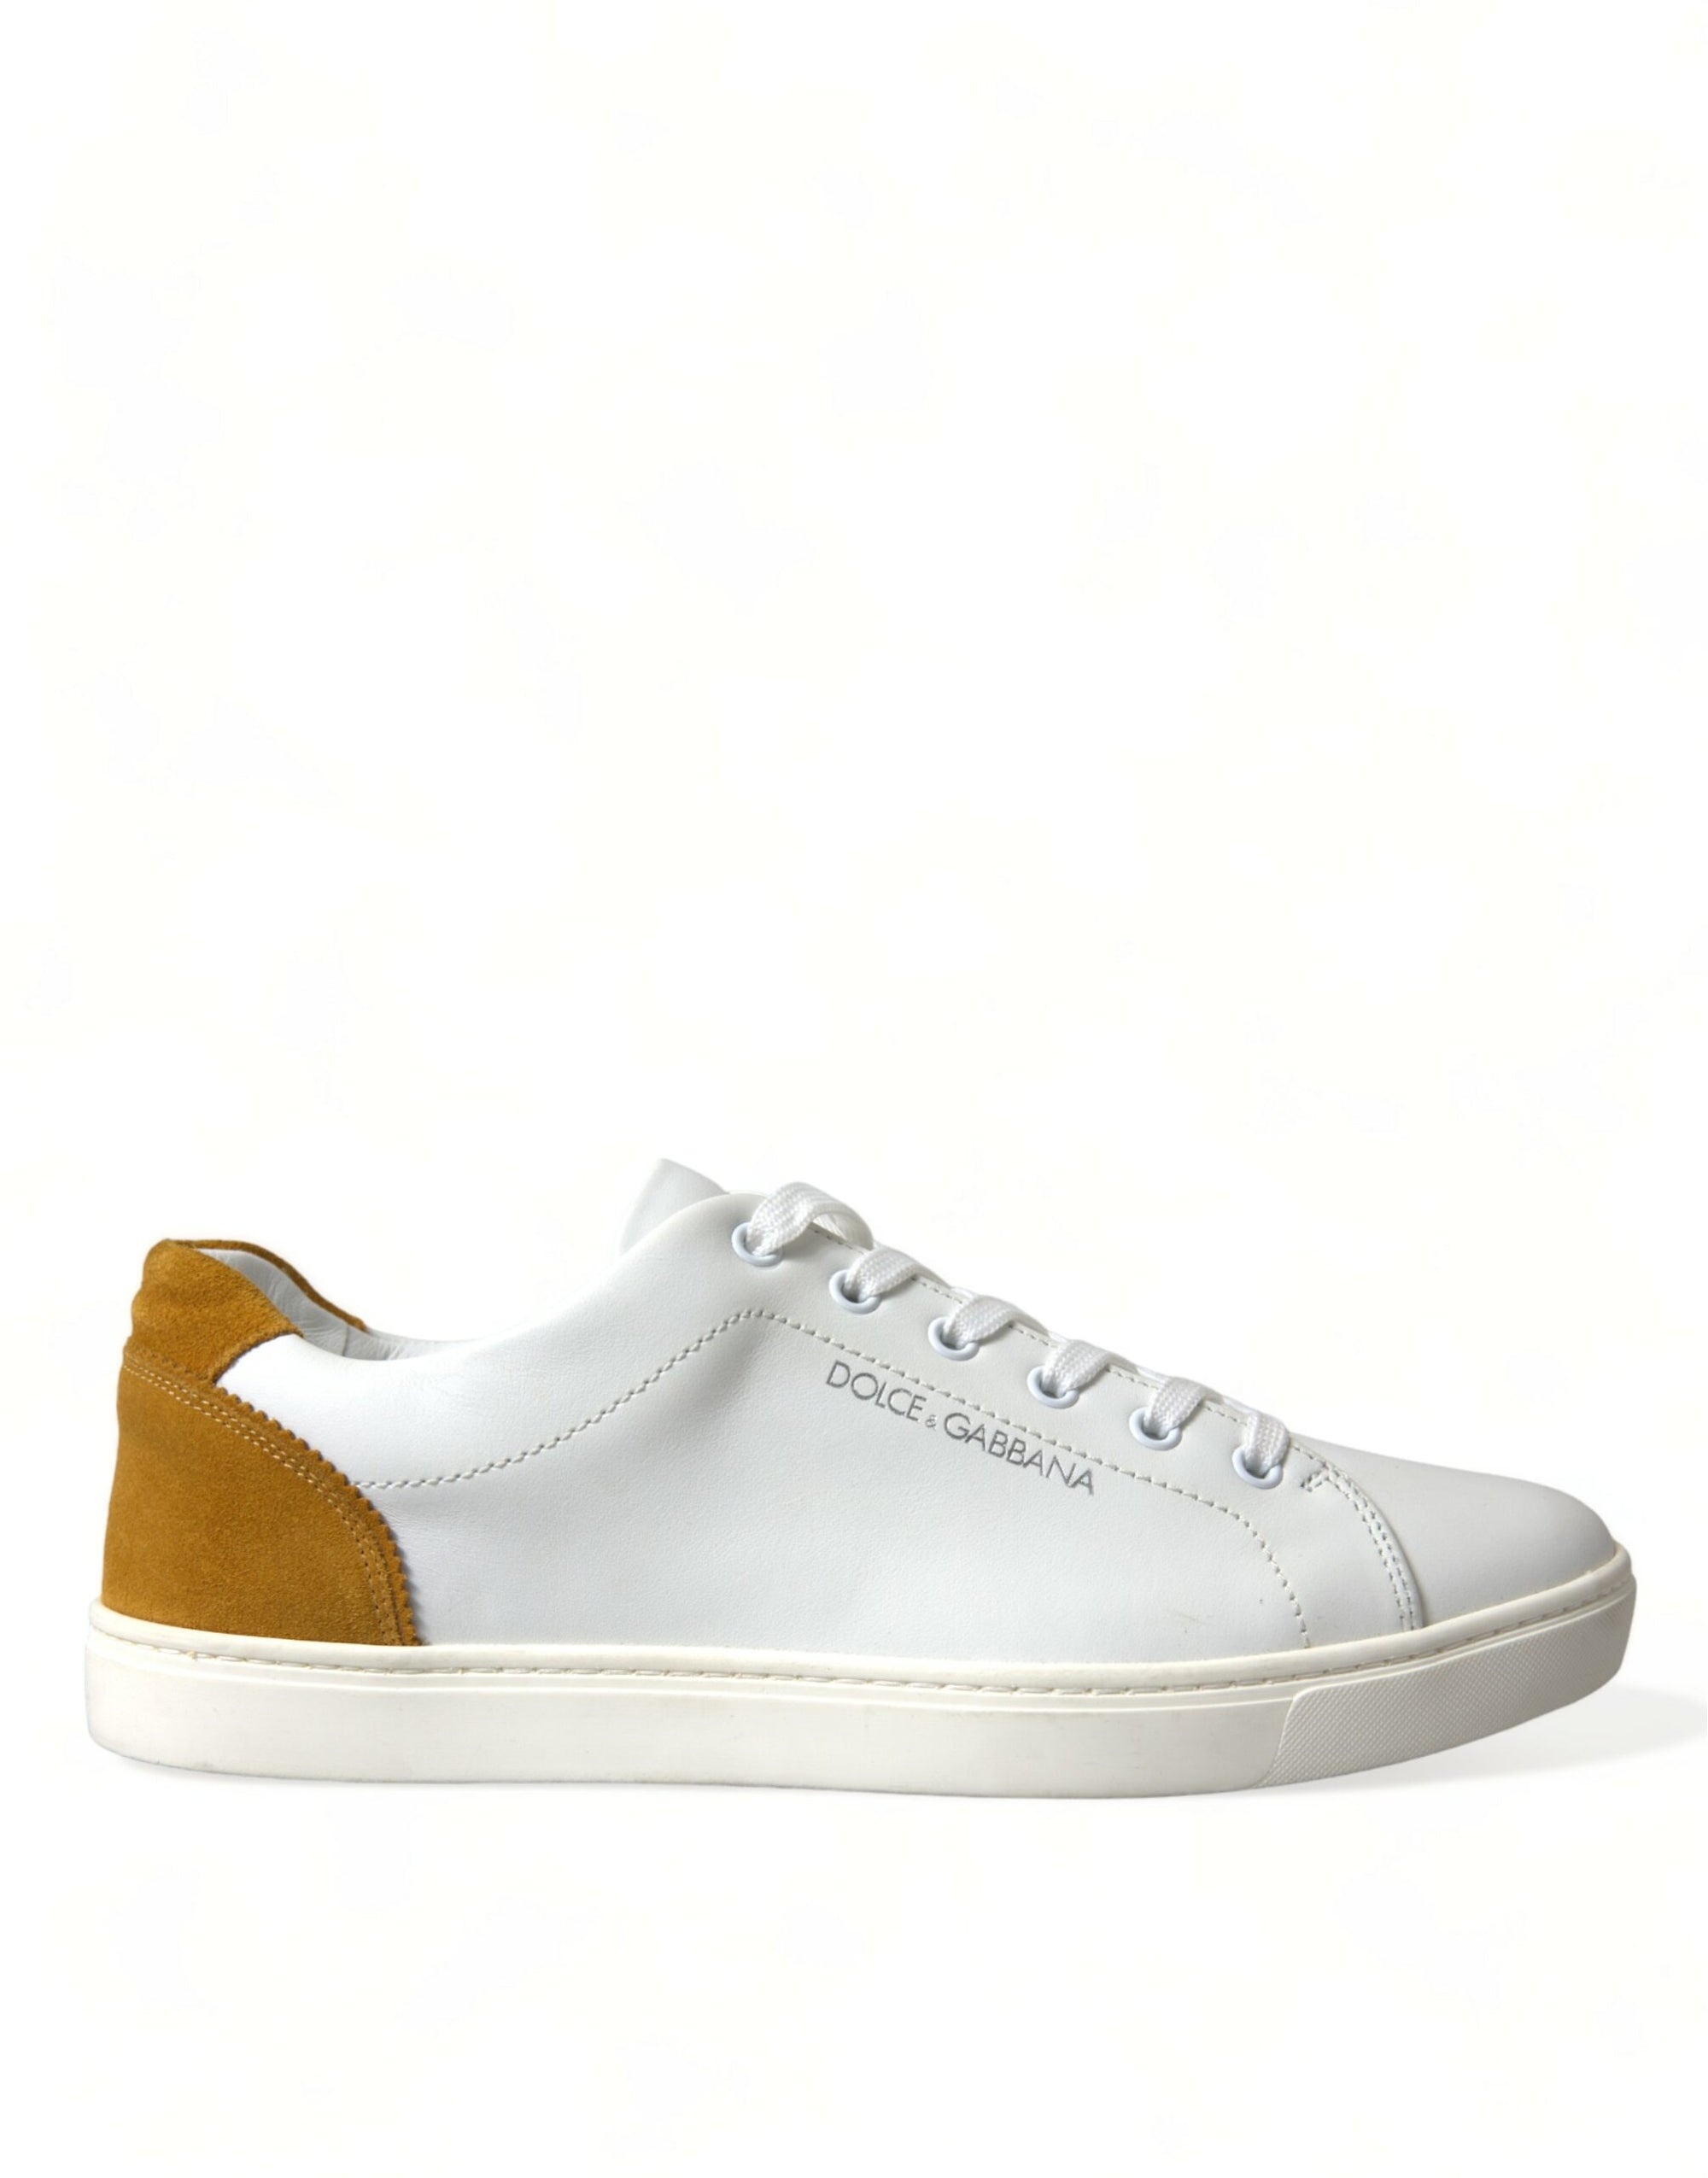 Chic White Calfskin Low Top Sneakers